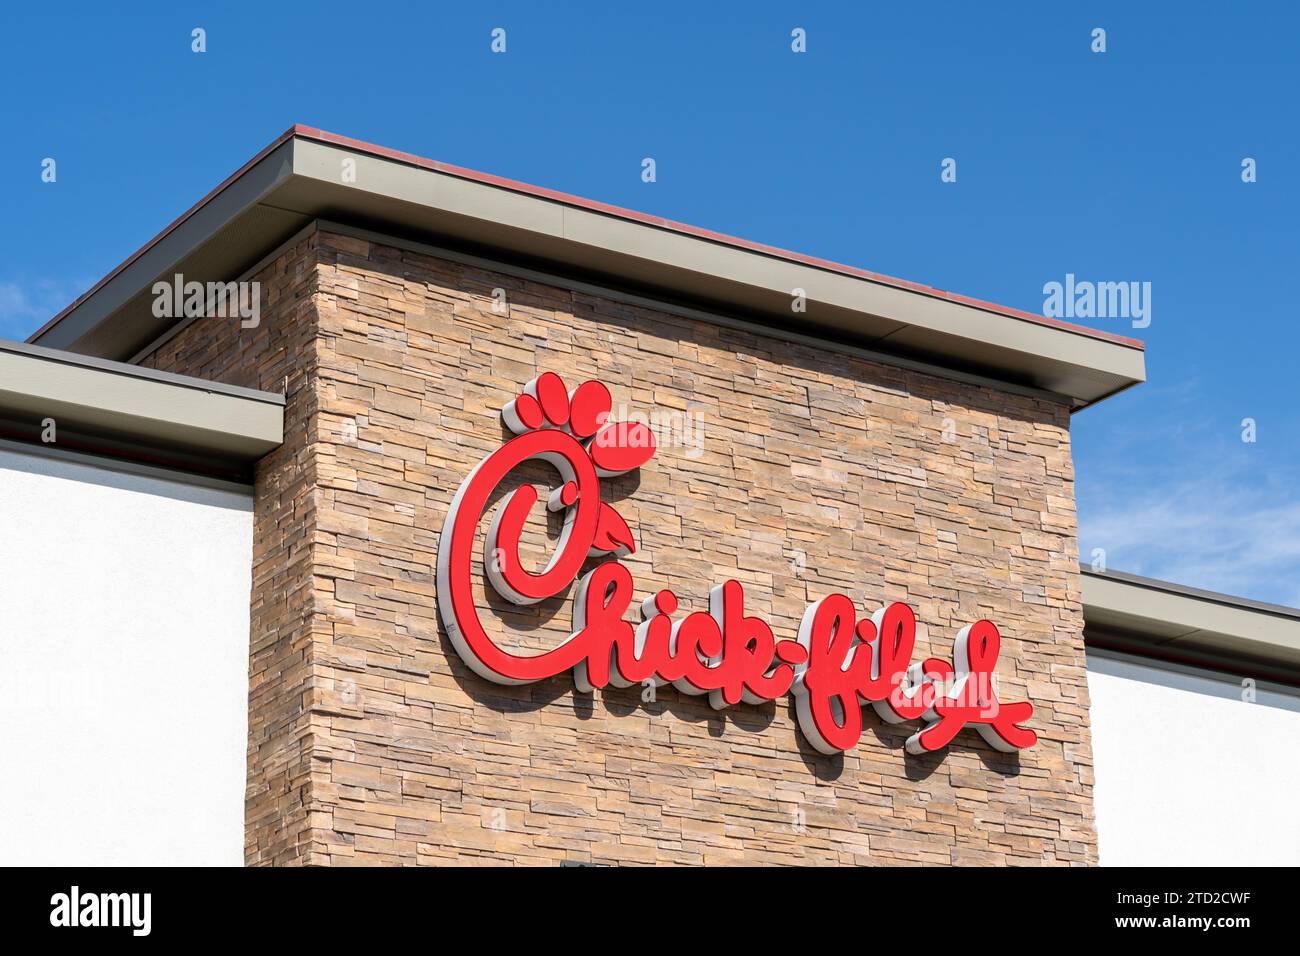 Close up of Chick-fil-A logo sign on the building in Salt Lake City, Utah, USA Stock Photo